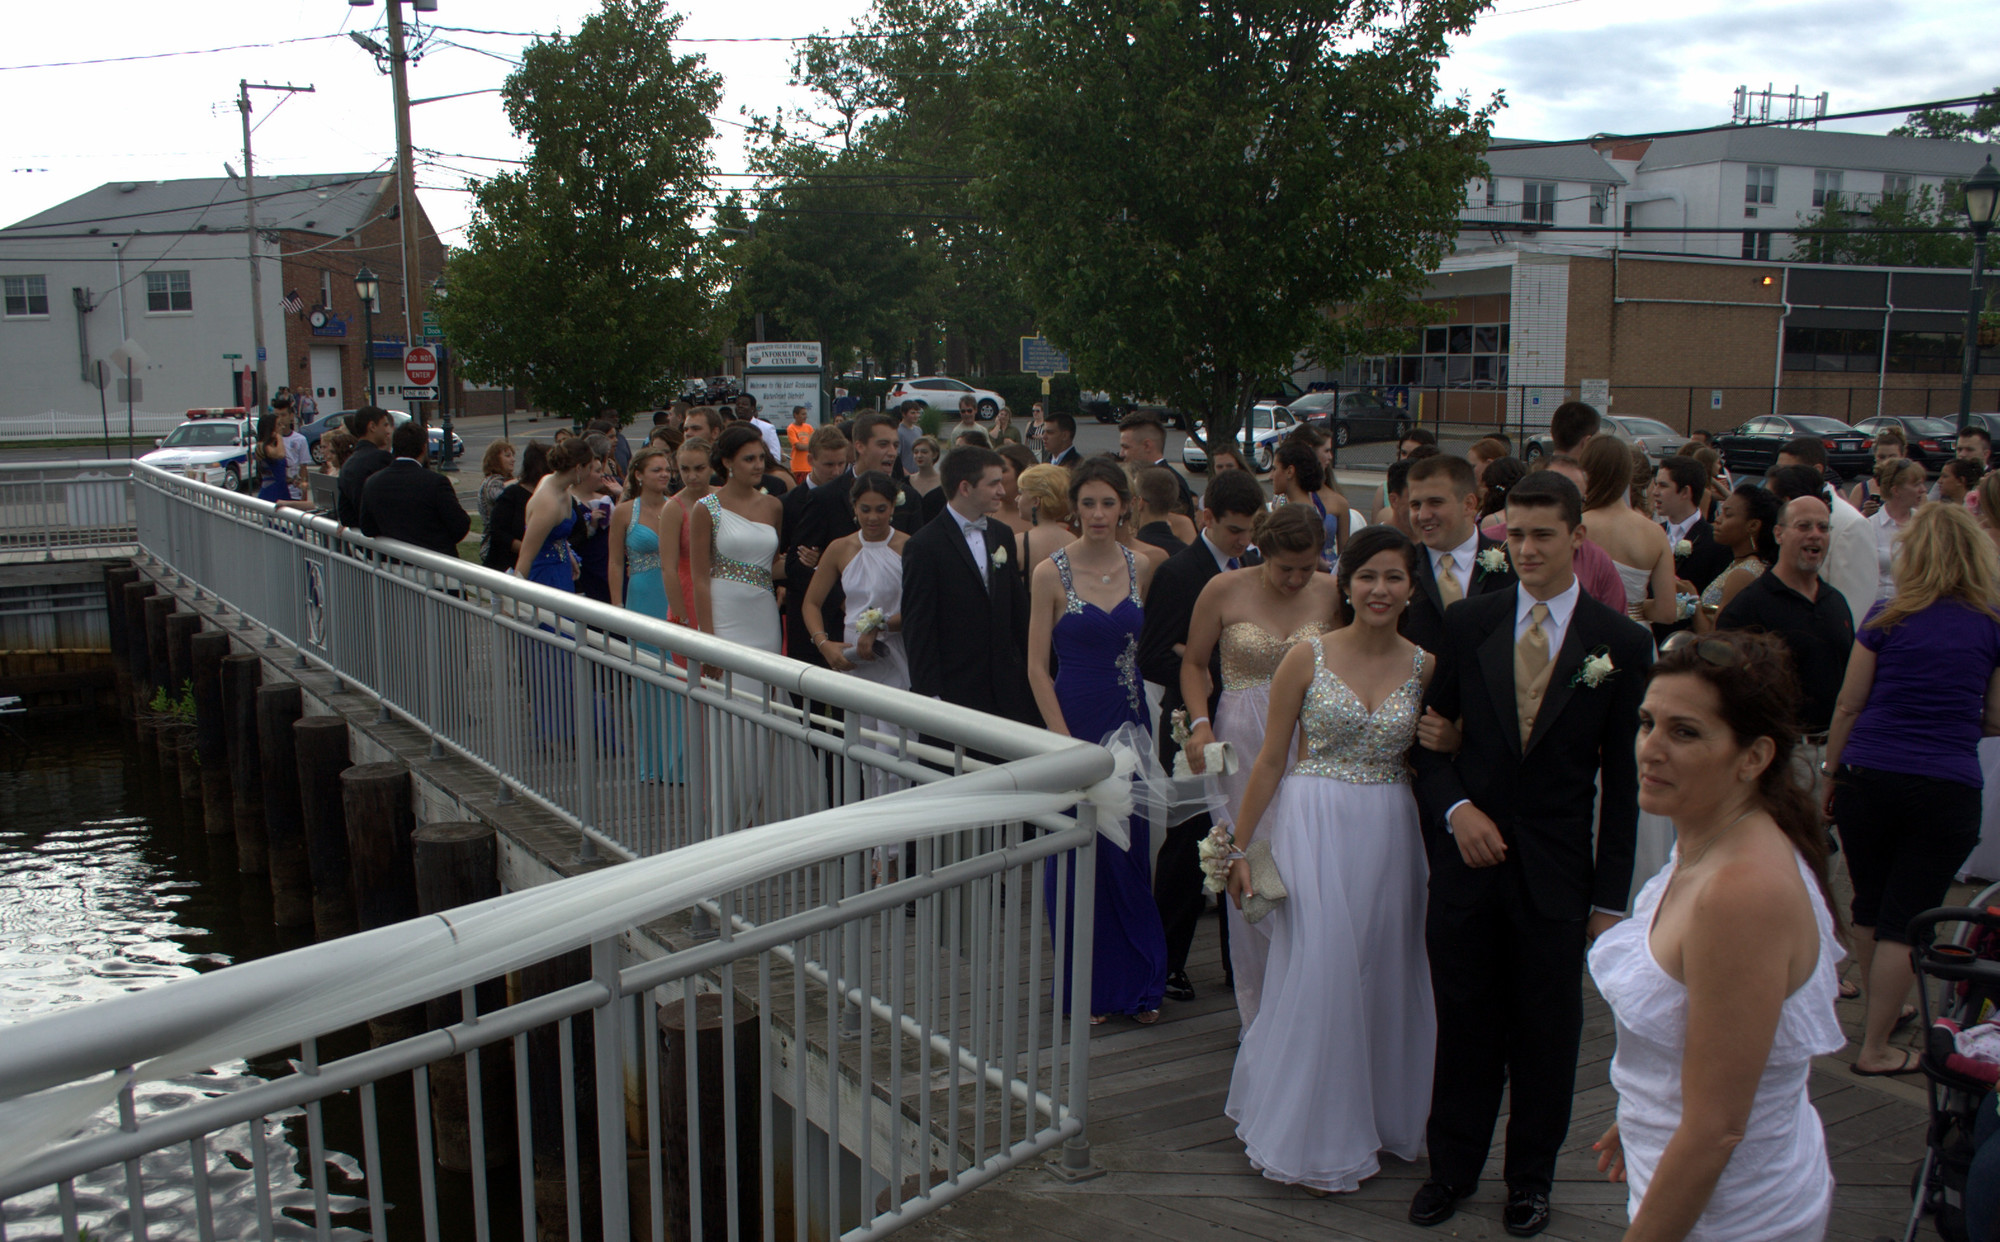 Dressed for their party, East Rockaway juniors, seniors and their guests walked along the waterfront to the delight of their waiting families and friends.